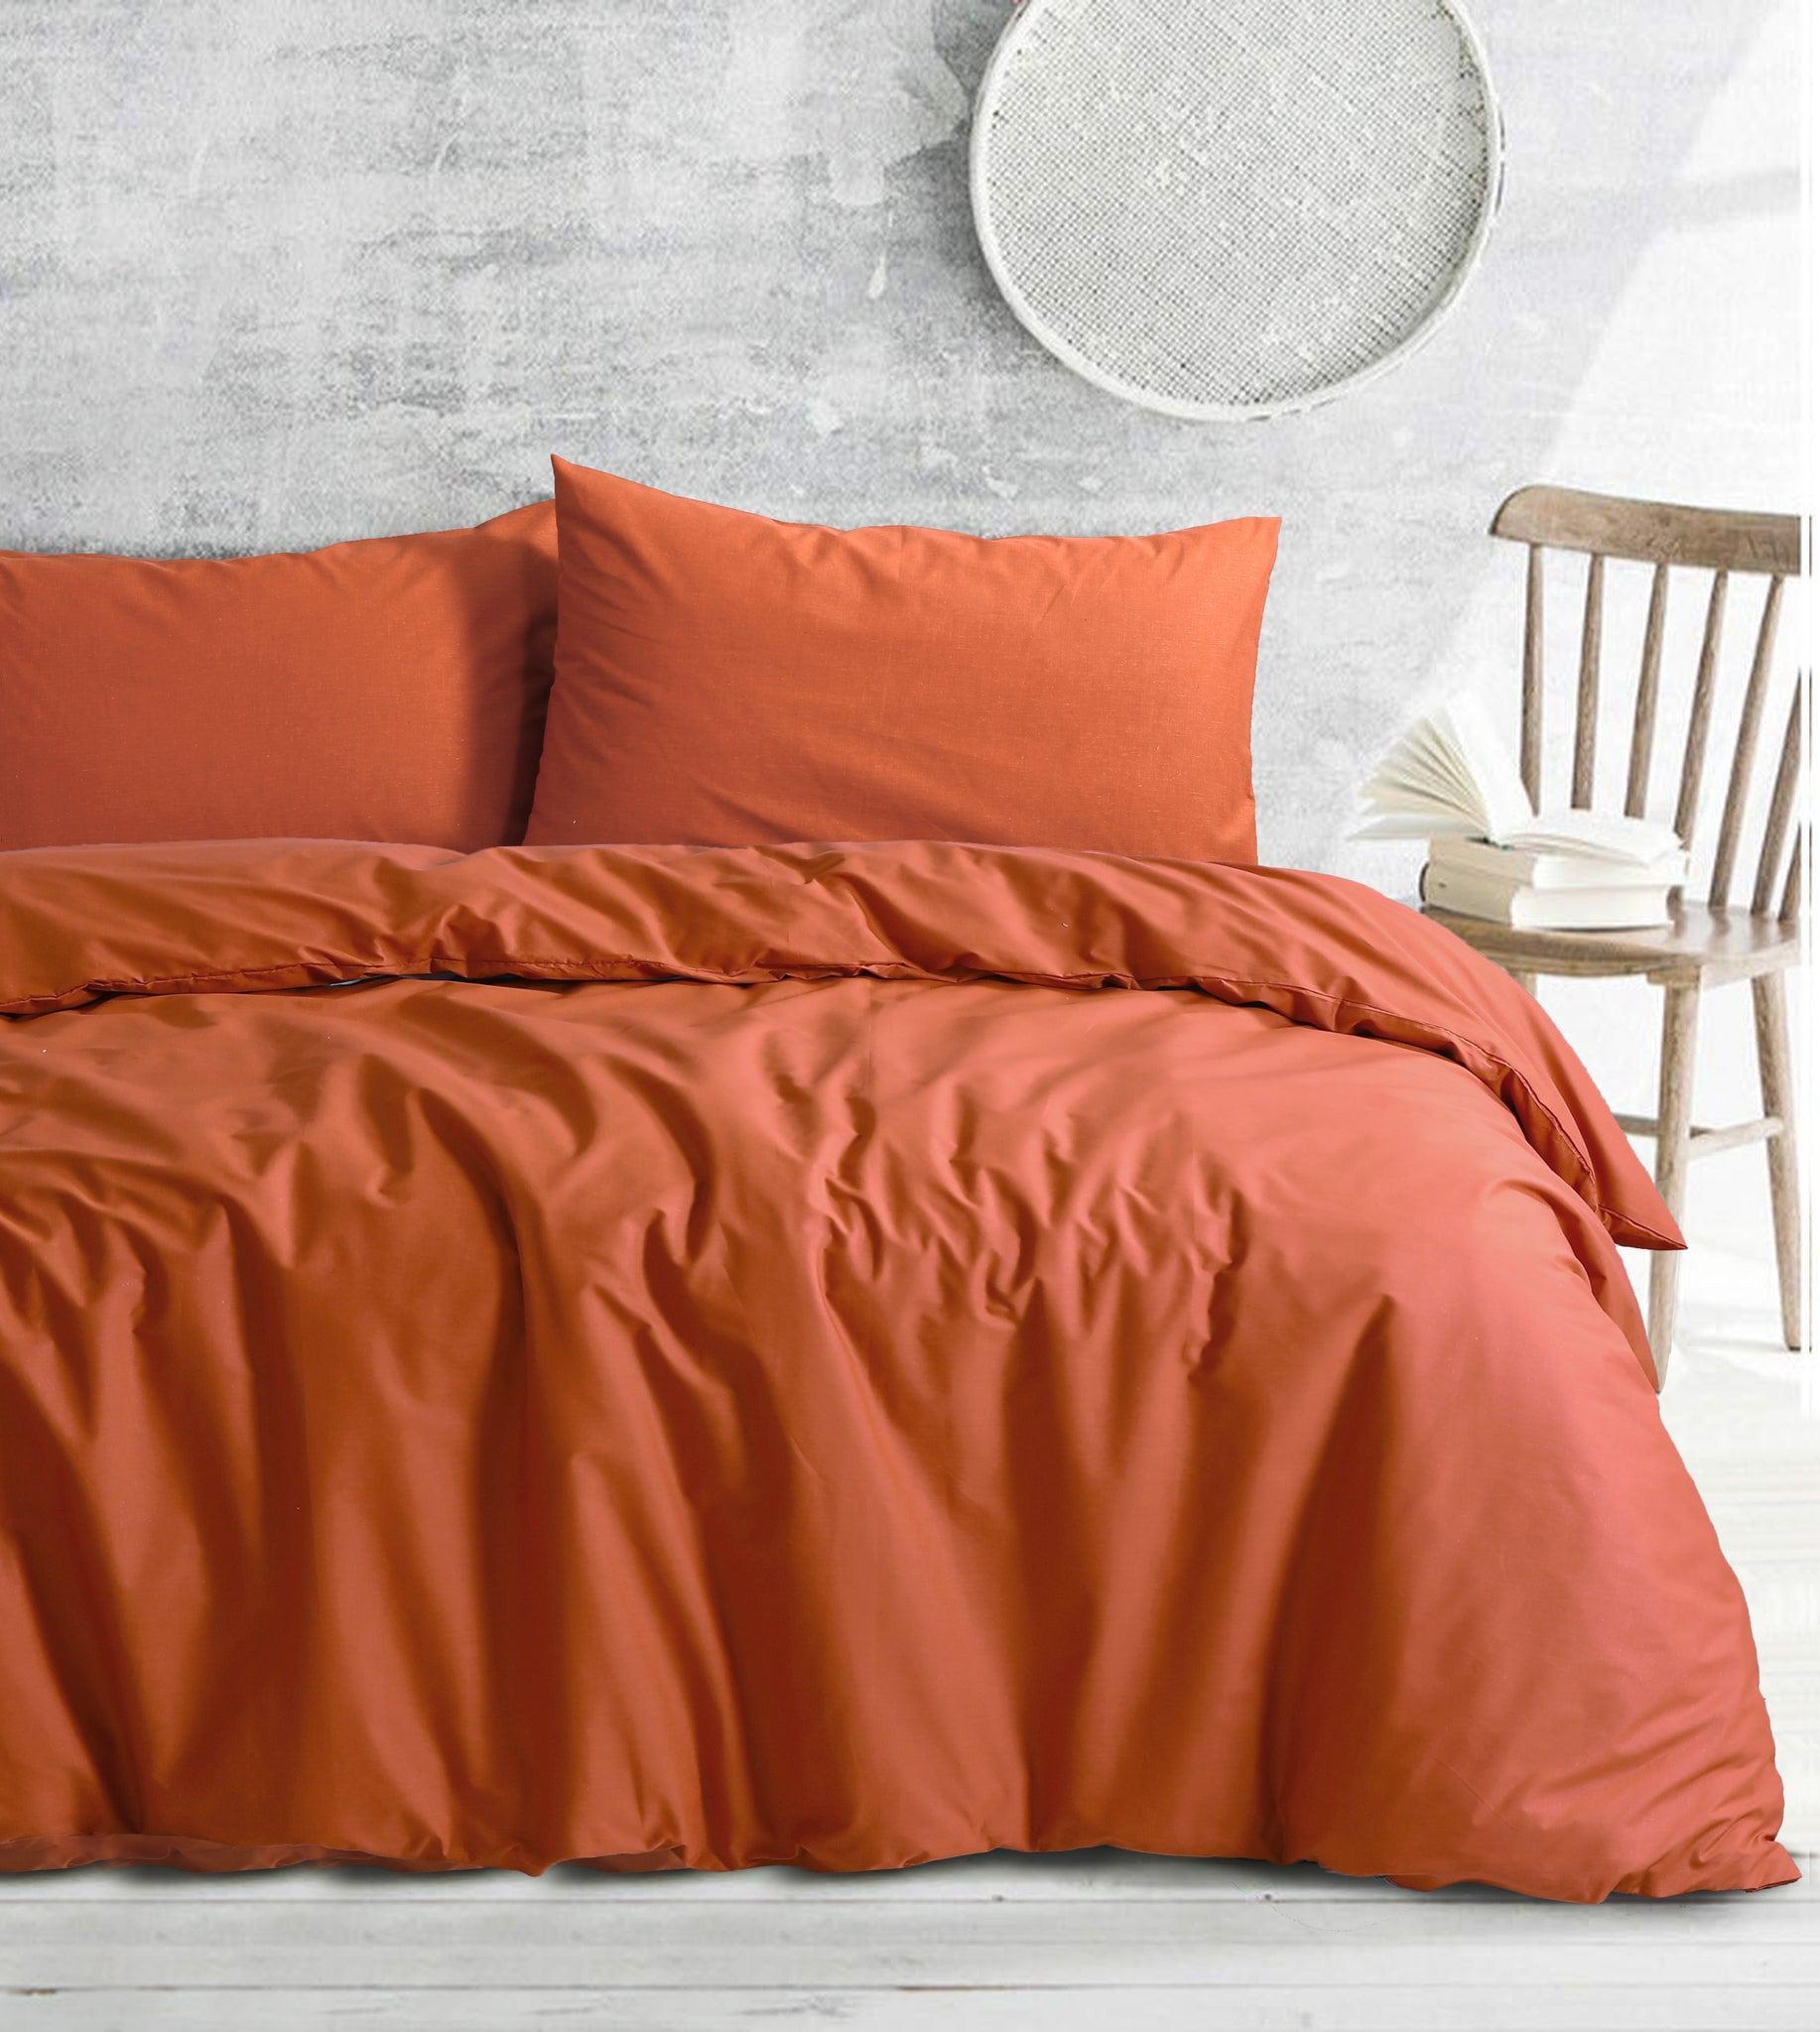 Amsons Royale Cotton Quilt Duvet Doona Cover Set with Europeon pillowcases - Rust